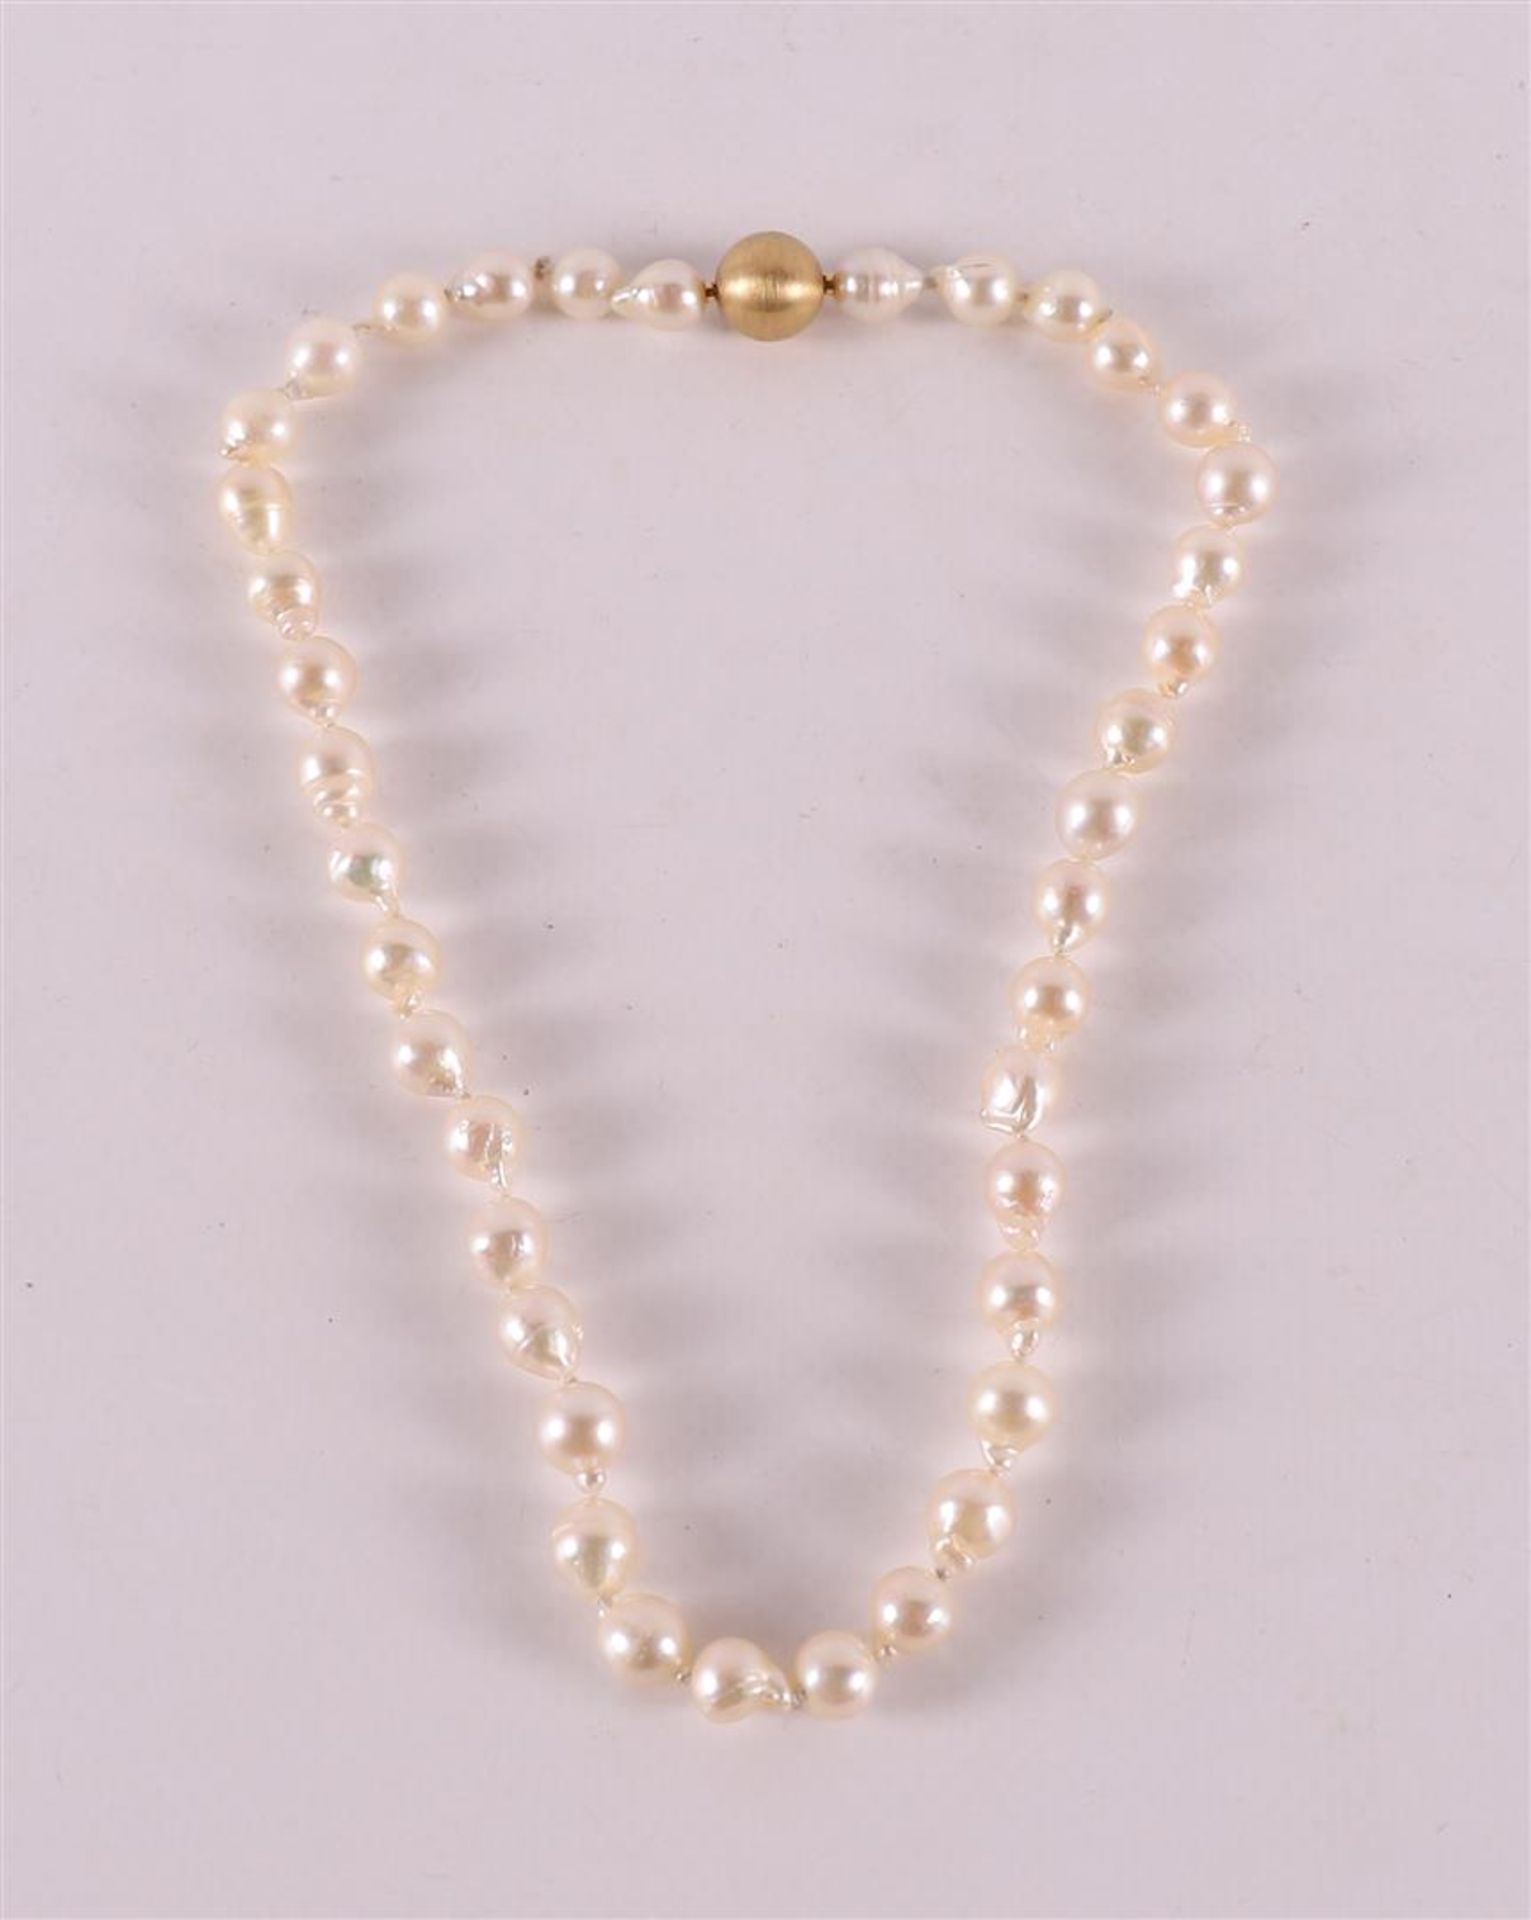 A necklace of cultured pearls on a mysterious ball clasp, design: Jörg Heinz, Germany, l 40 cm.